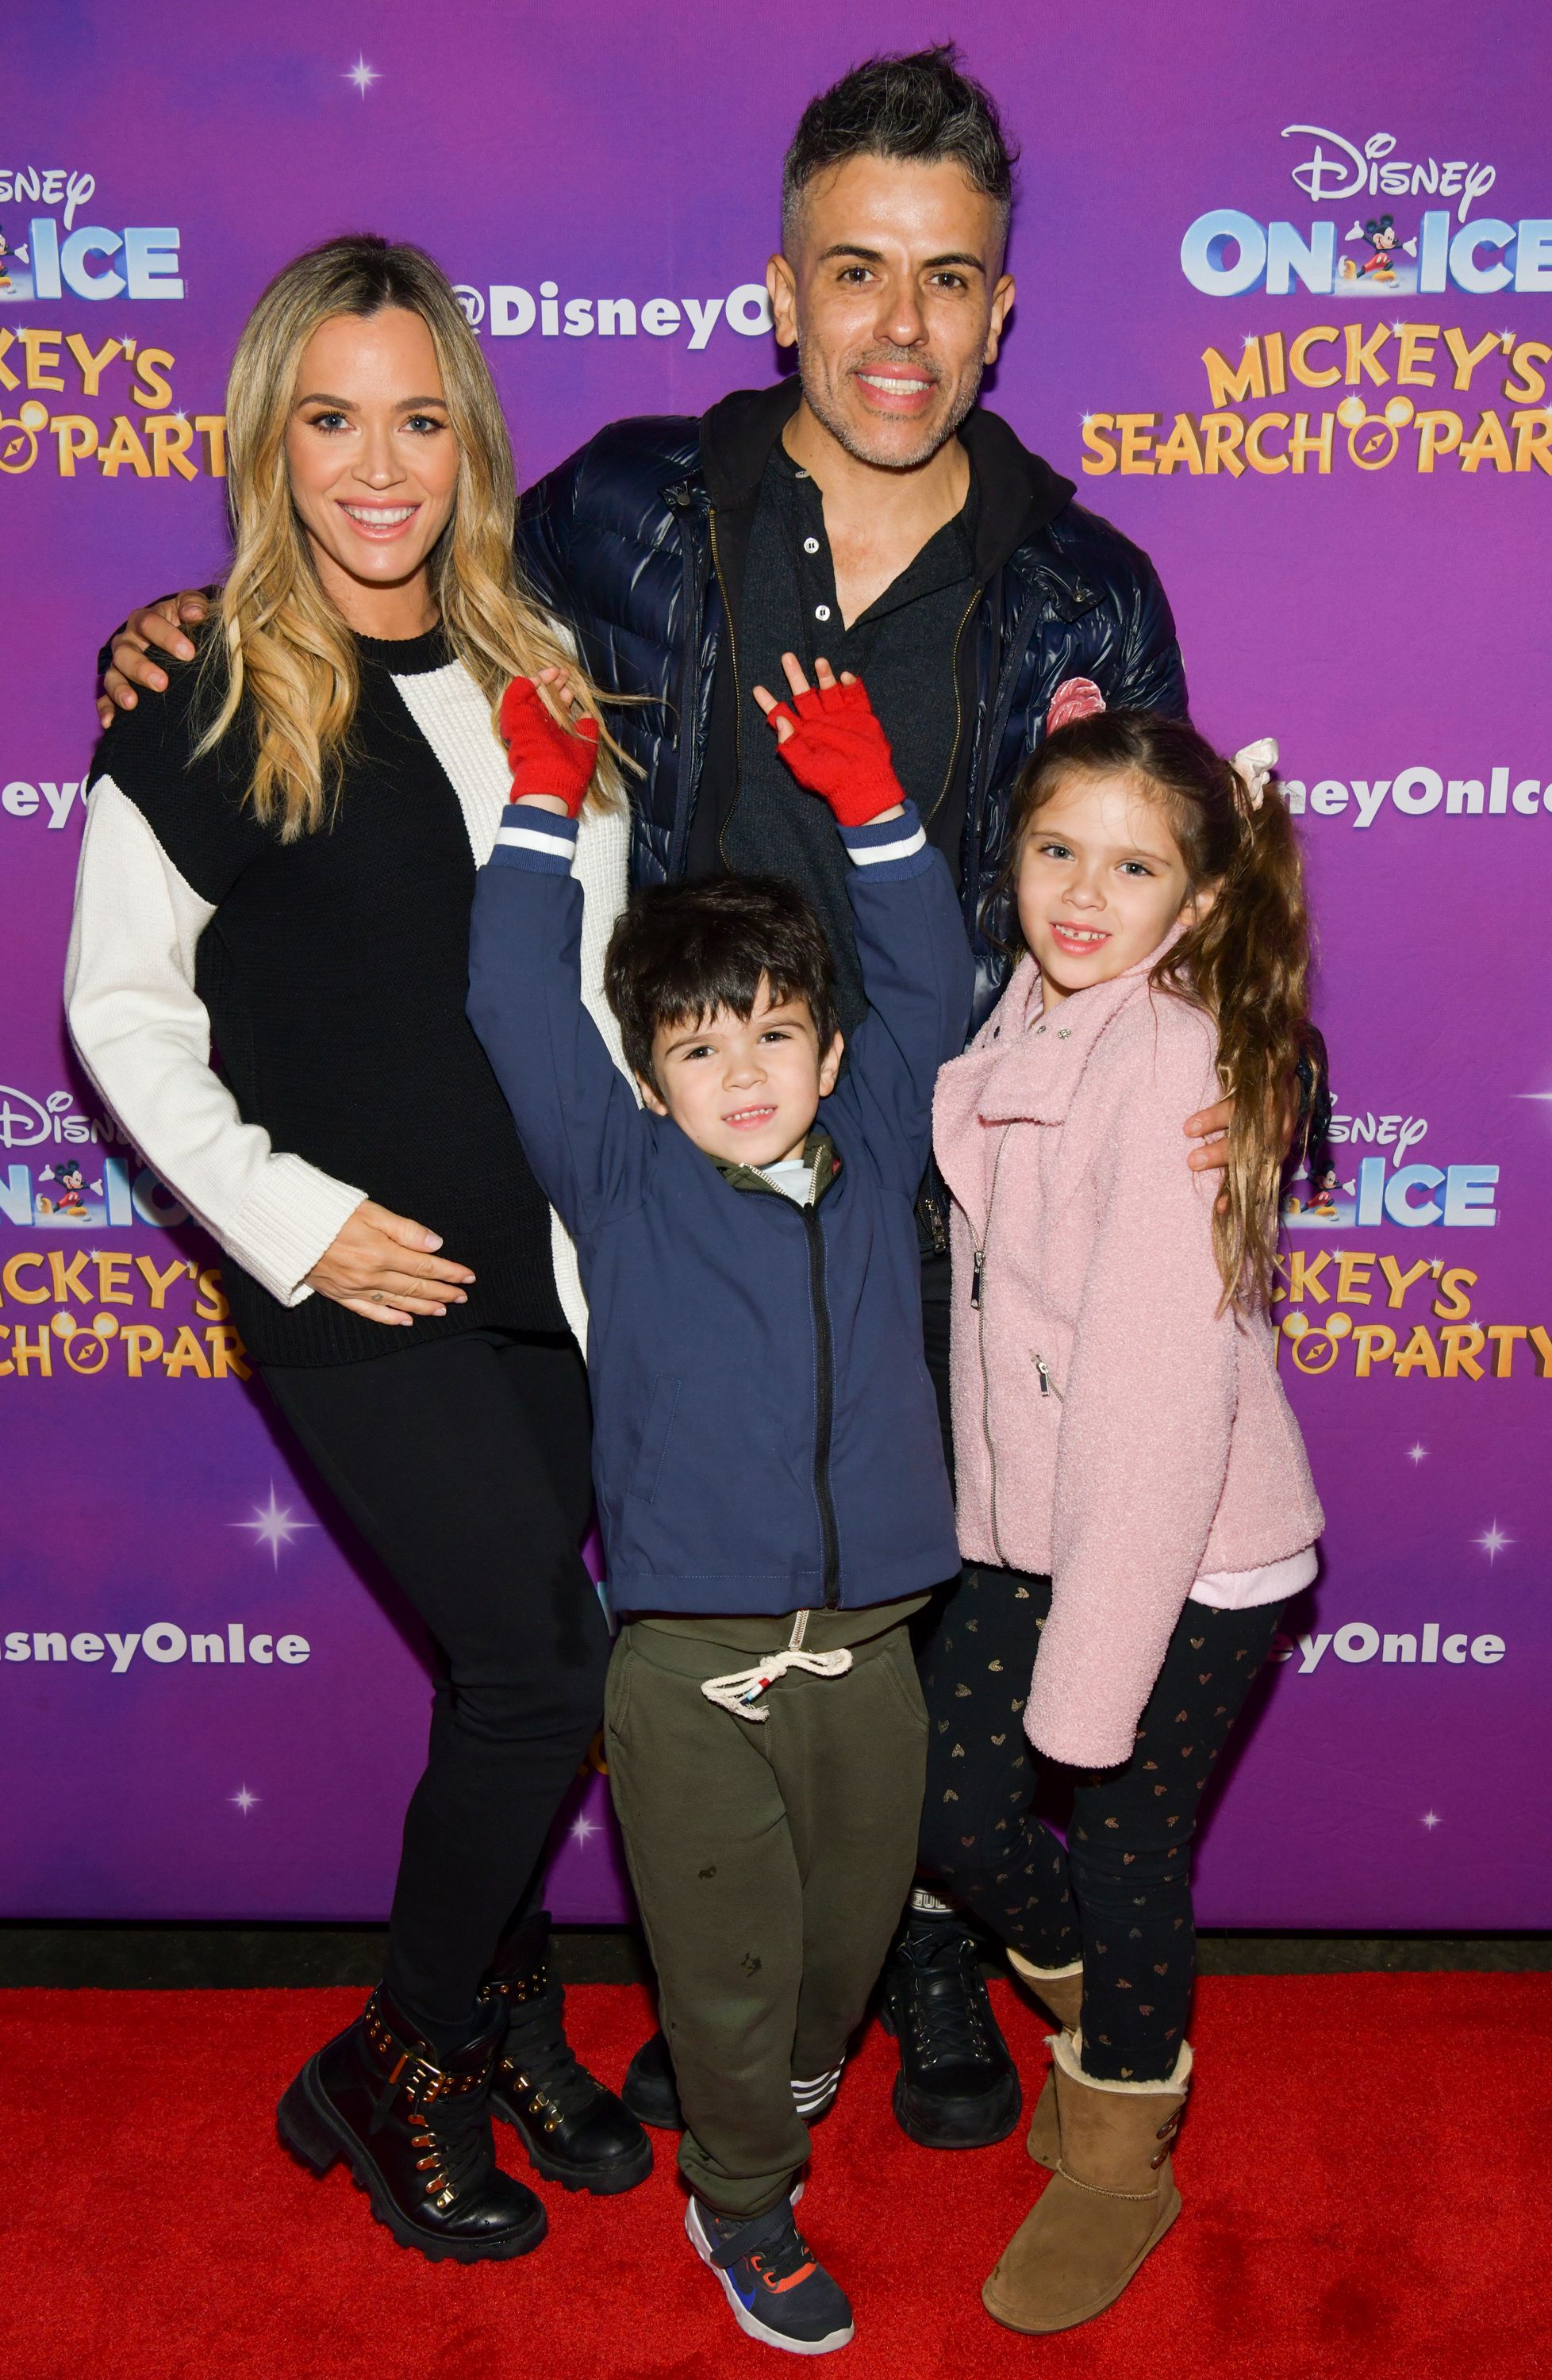 Teddi Mellencamp and Edwin Arroyave, with Cruz and Slate Arroyave at the 2019 Disney On Ice "Mickey's Search Party" in Los Angeles | Source: Getty Images